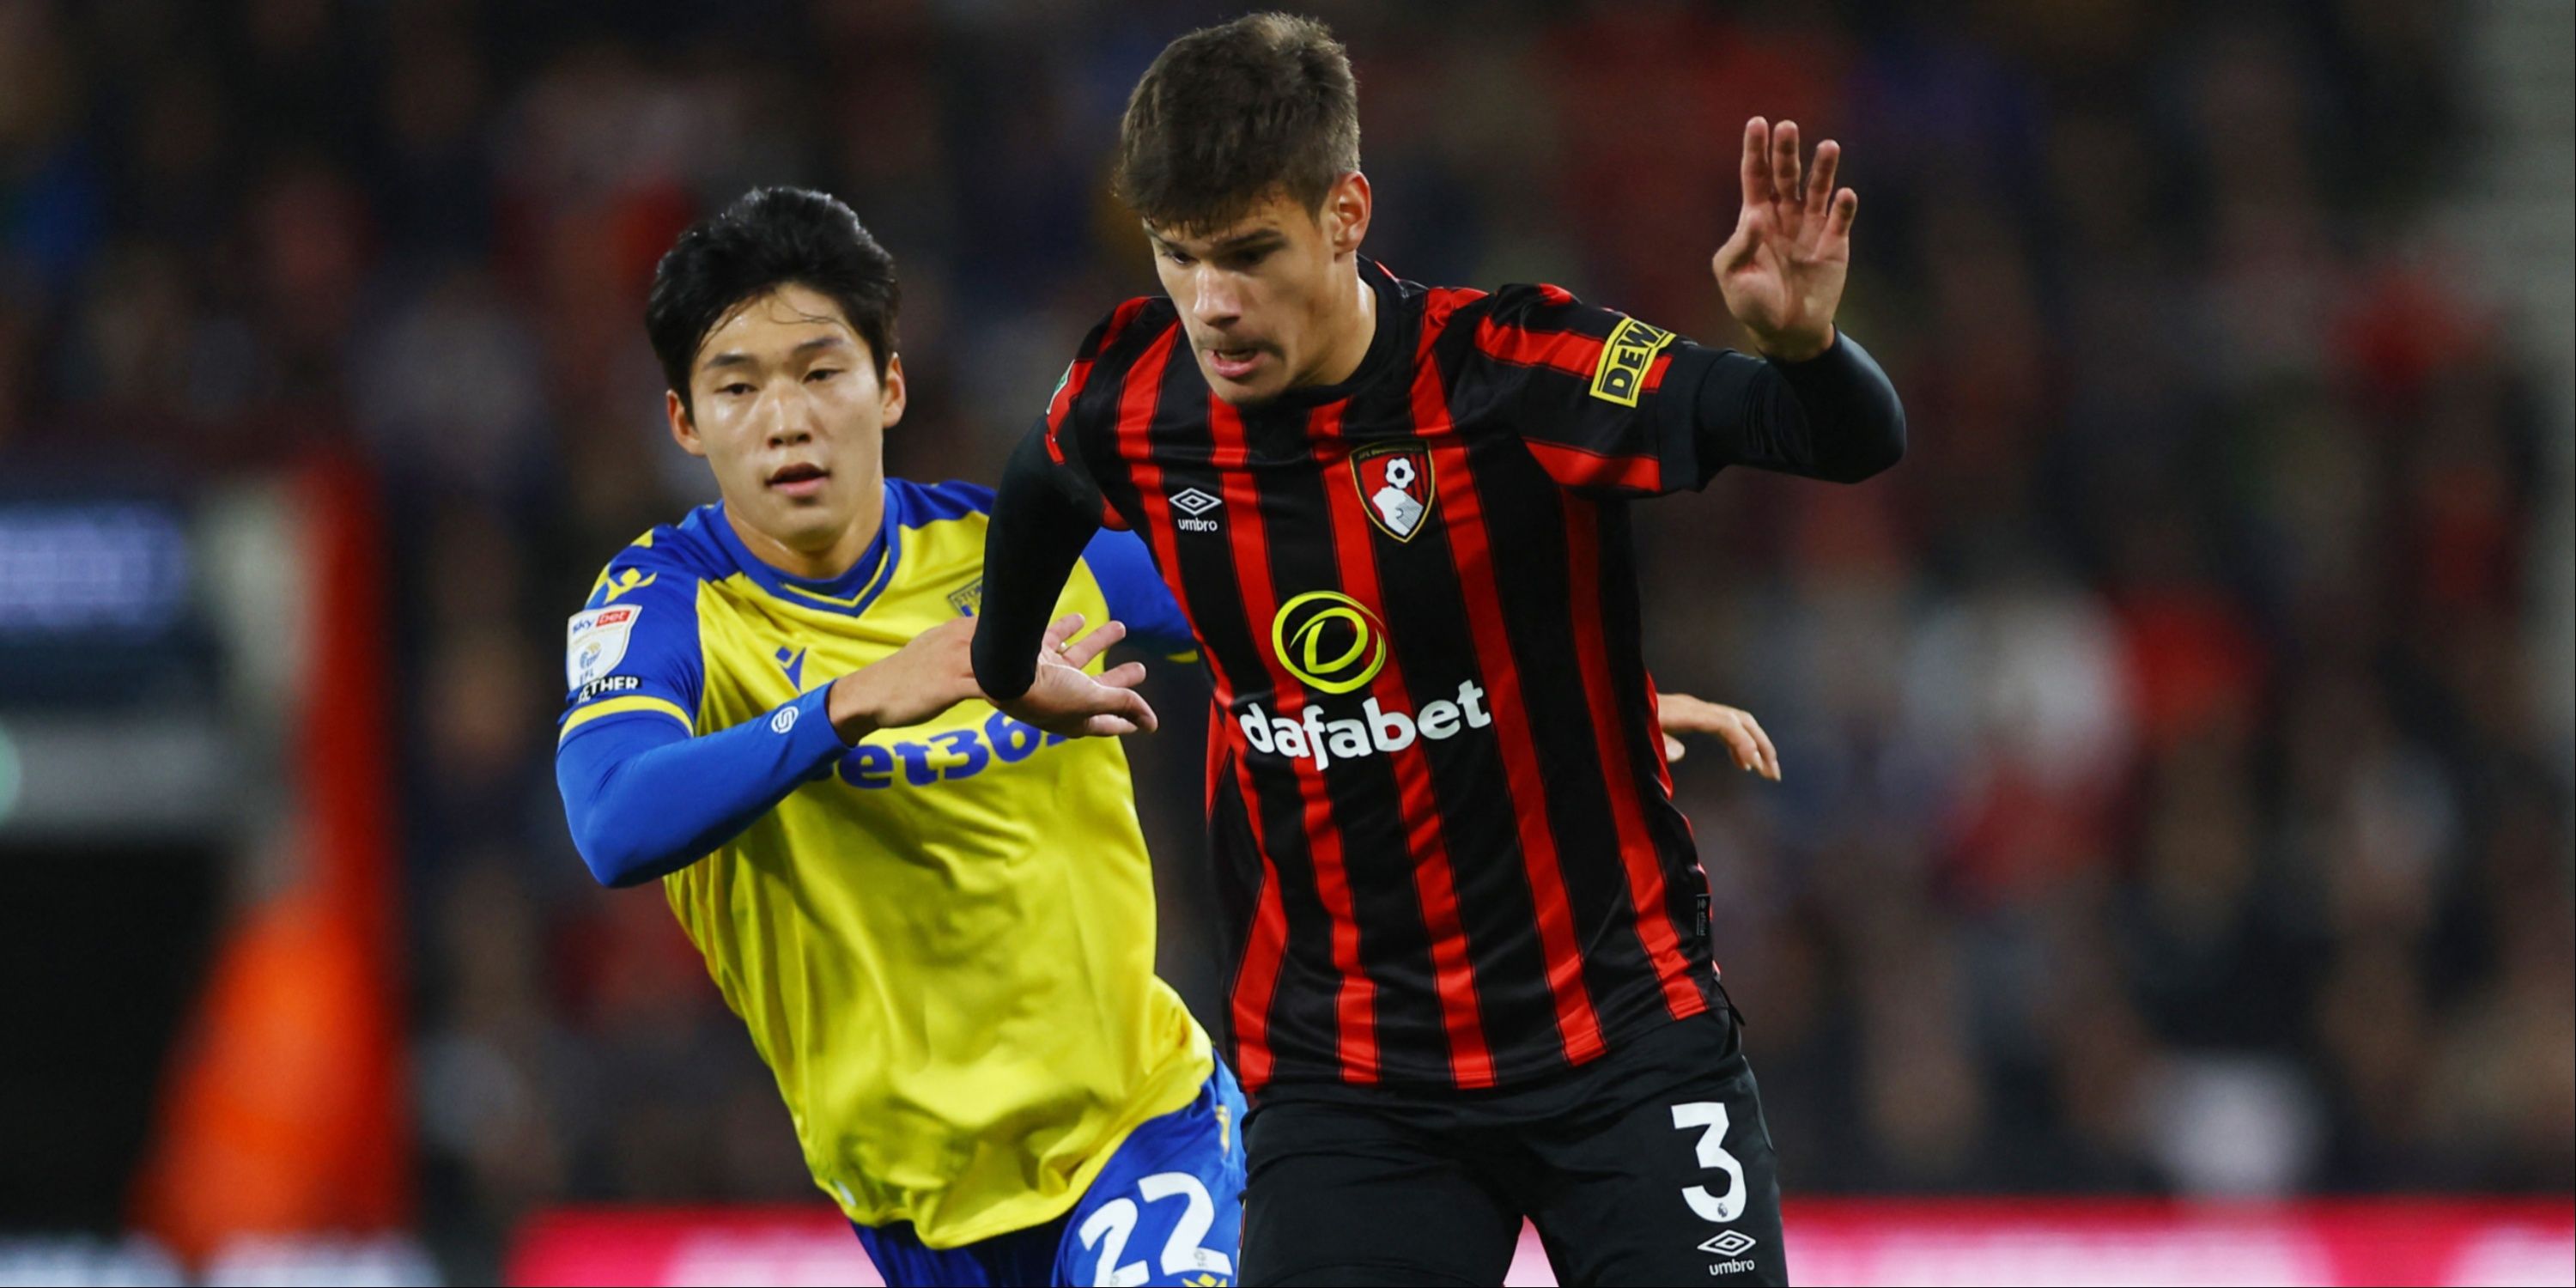 Stoke City's Bae Jun-Ho in action with AFC Bournemouth's Milos Kerkez